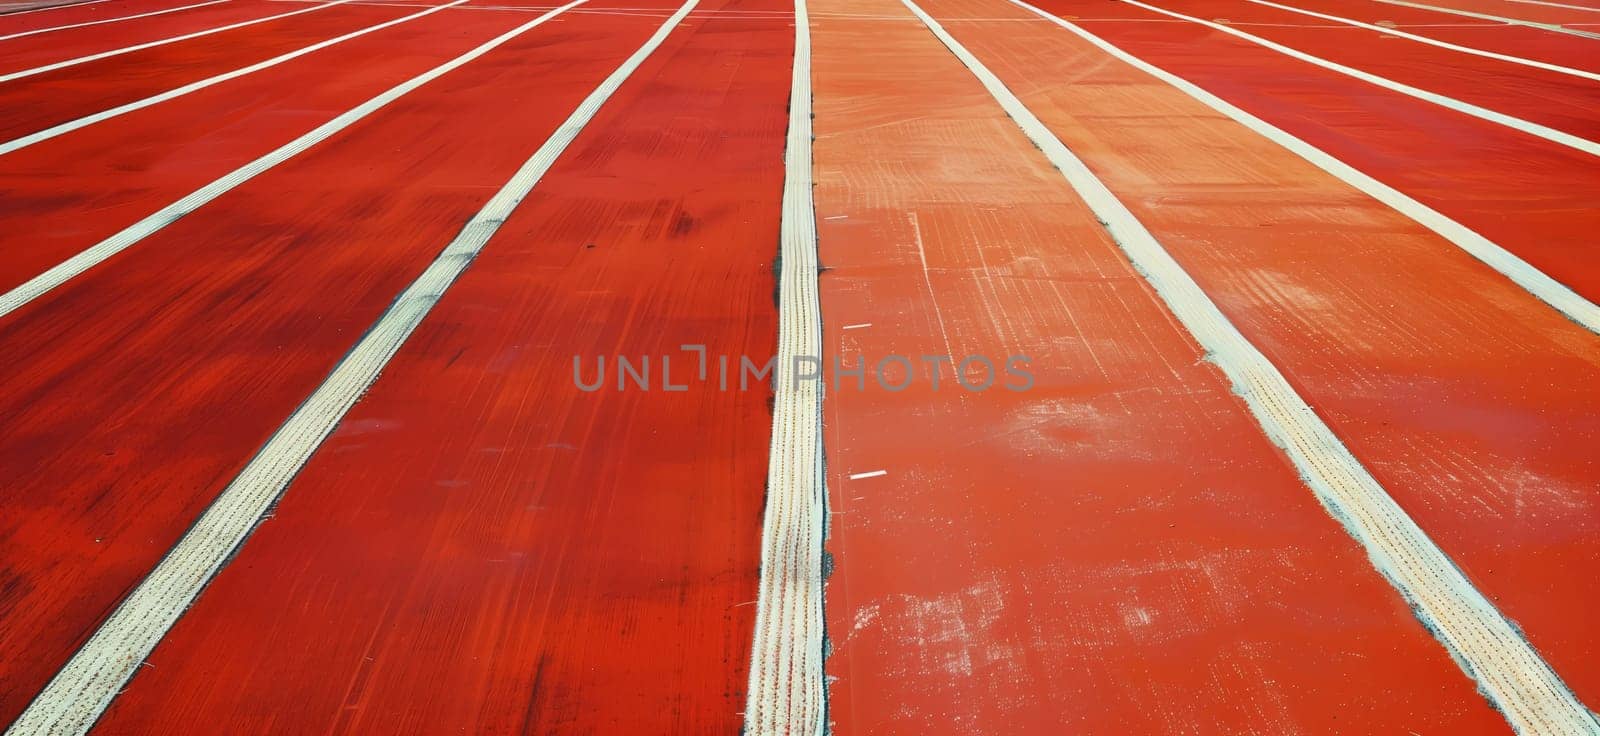 Parallel wood track with red and white lines for track and field athletics by richwolf